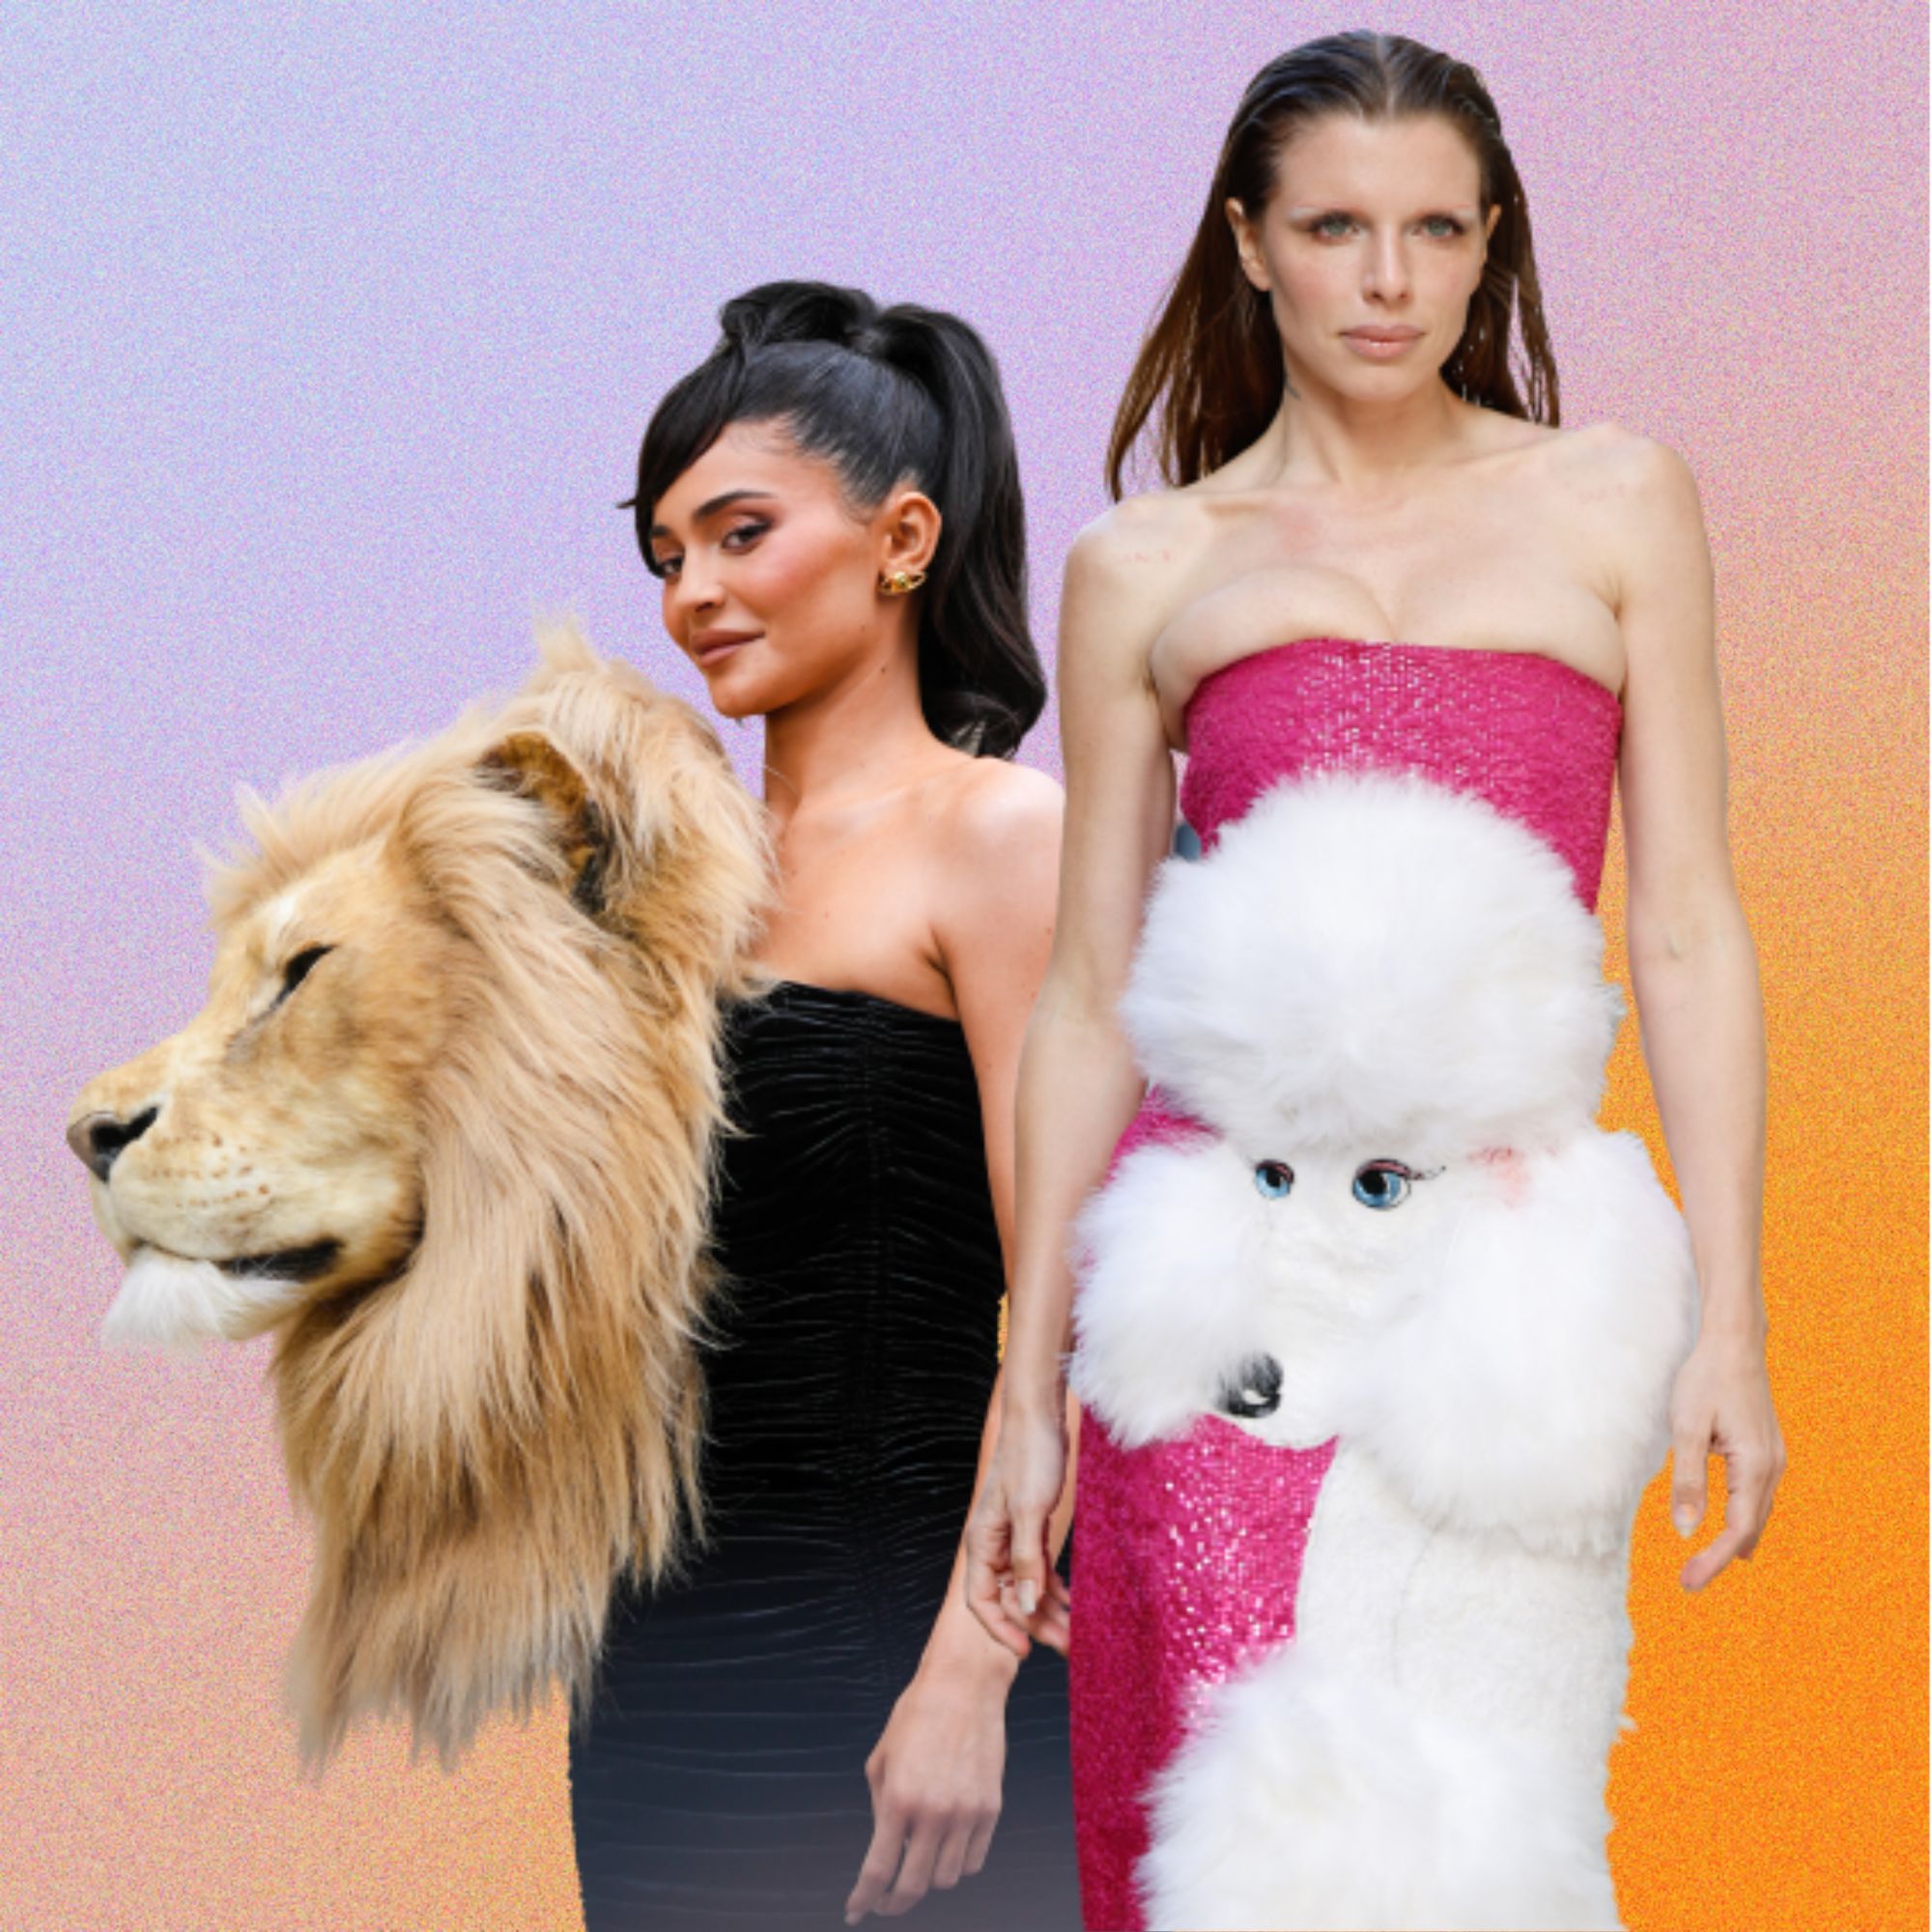 Wearing Animal Tails is Another Fashion Trend? - Design Swan